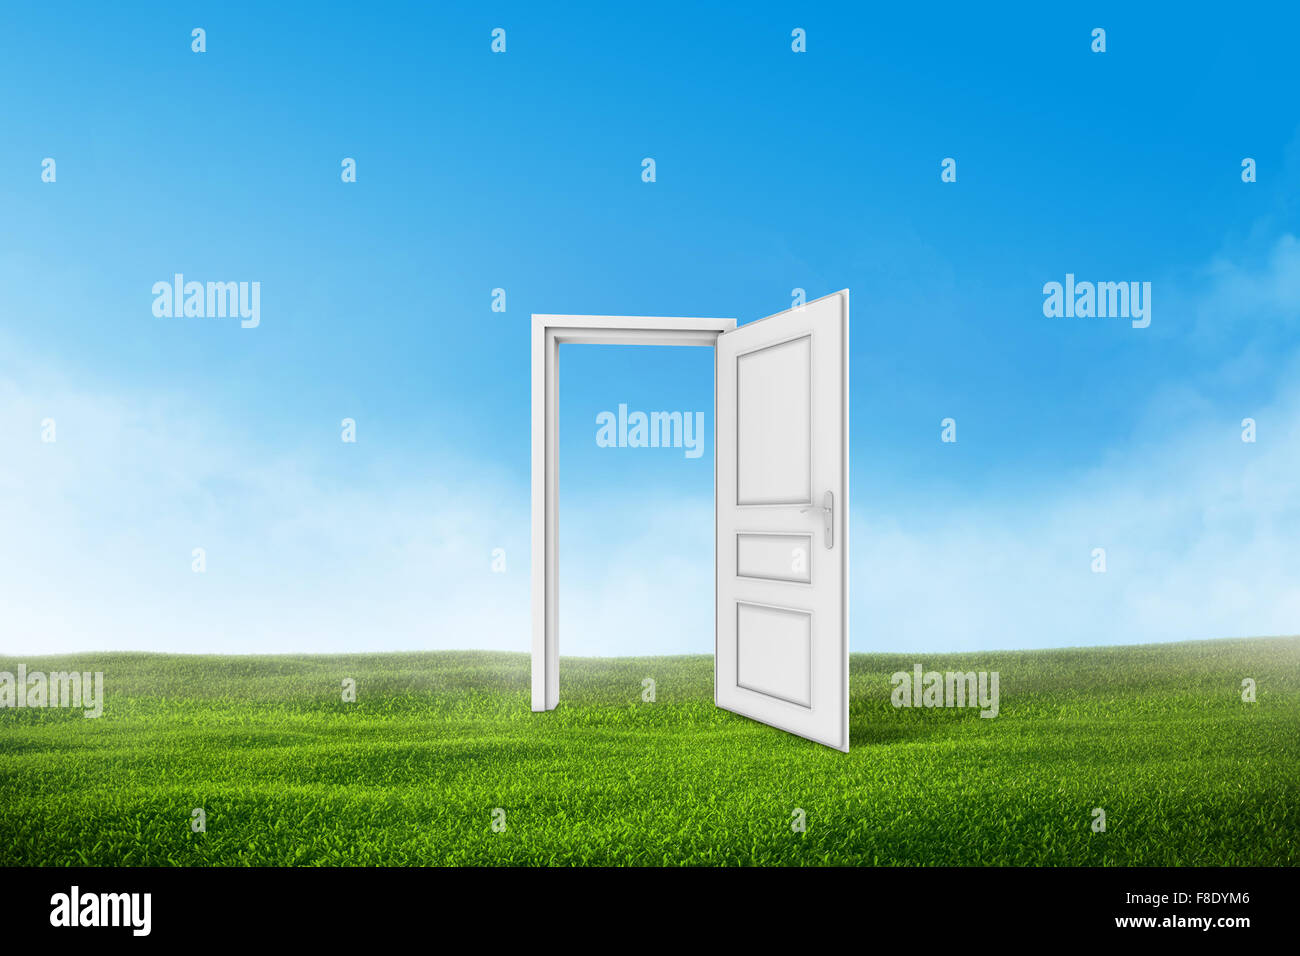 White door on a green grass field with blue sky background Stock Photo